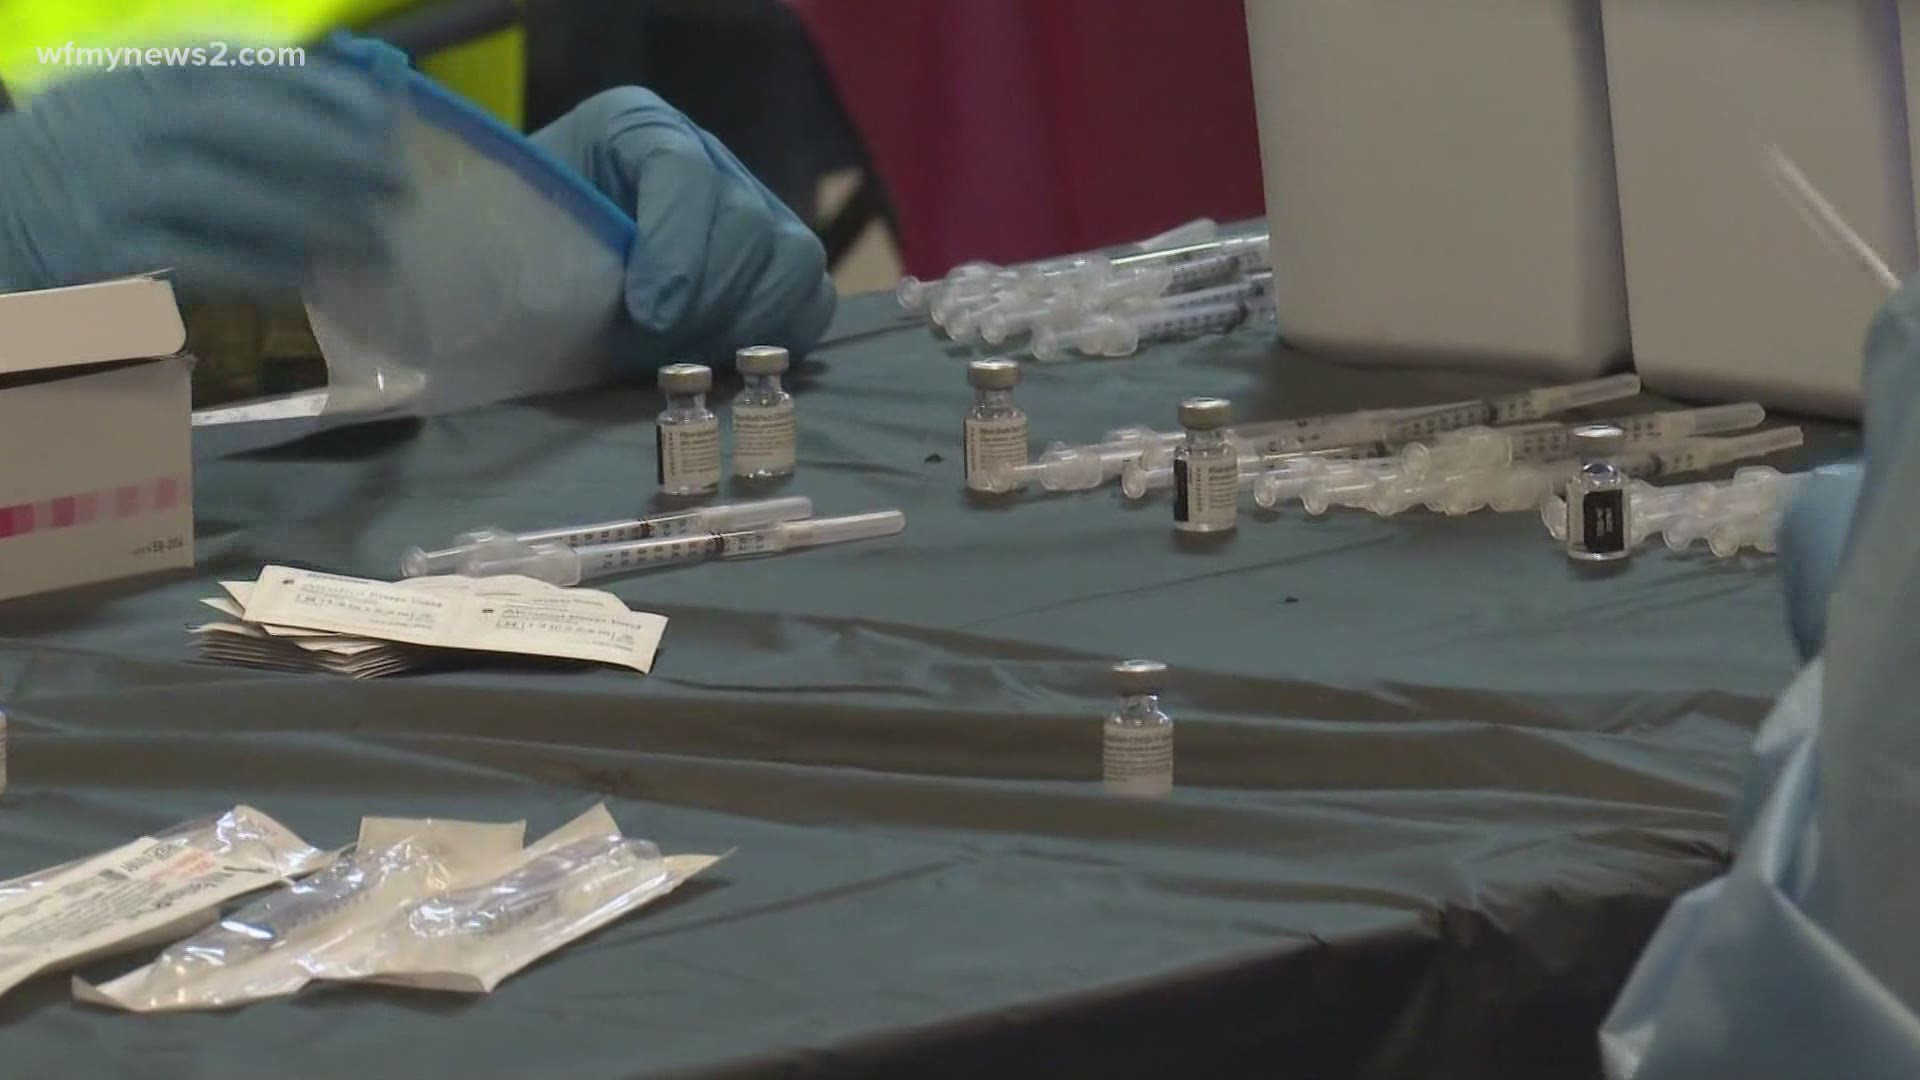 The Beloved Community Center of Greensboro says half of the 7,500 vaccine shots booked for March 10-14 at the FEMA site are set aside for underserved communities.